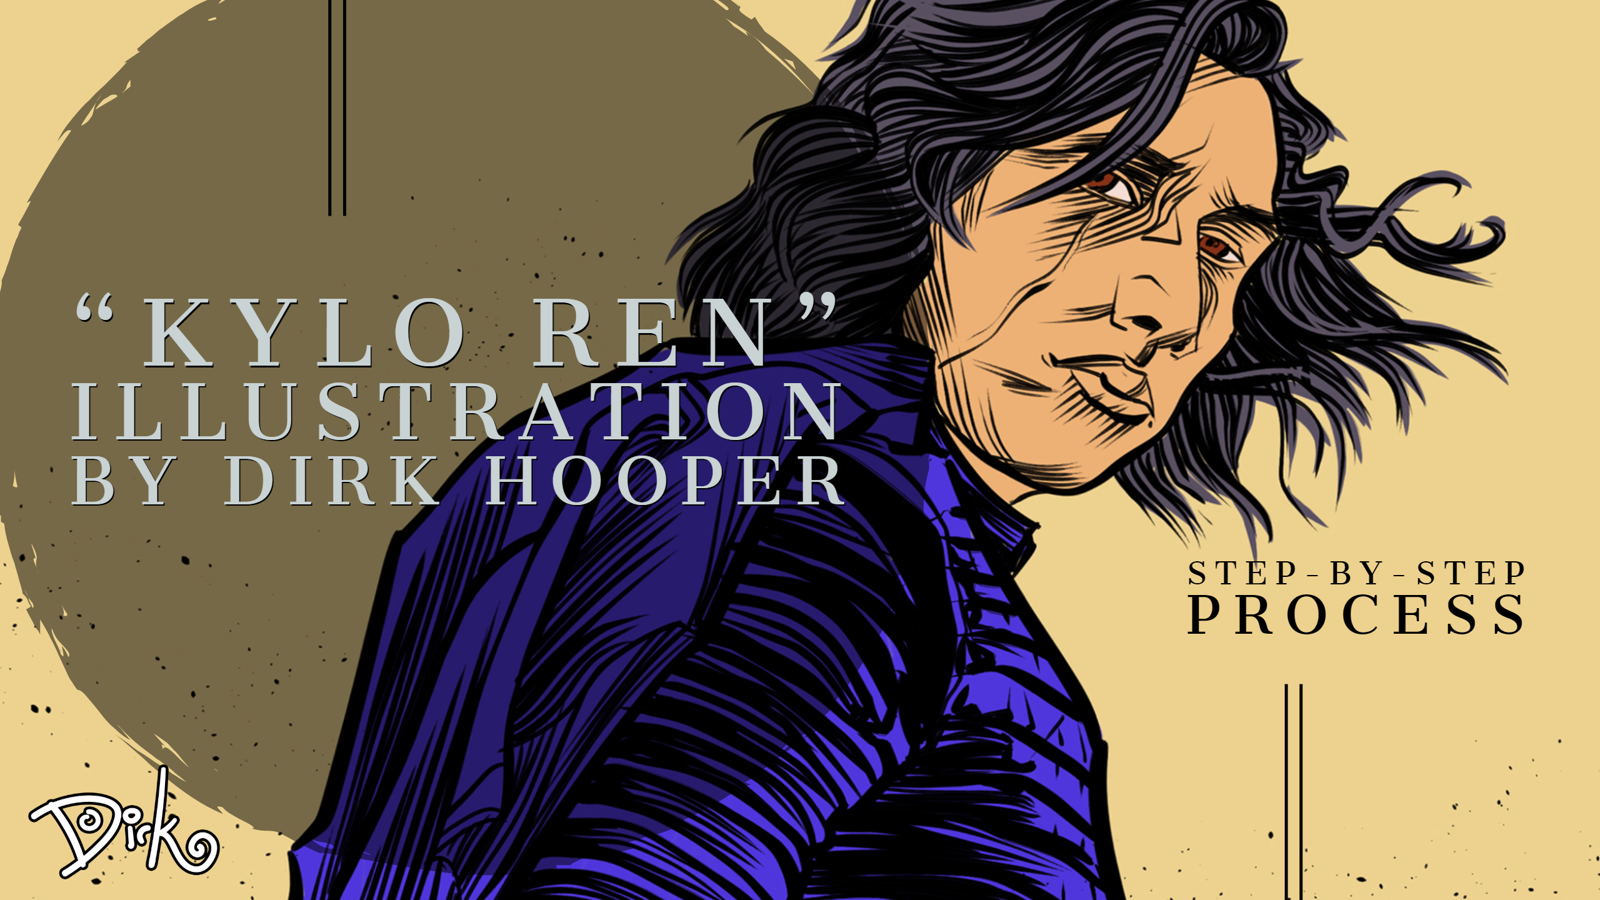 Photo by Dirk Hooper with the username @DirkHooper, who is a verified user,  July 31, 2019 at 8:21 PM and the text says '"Kylo Ren" Artwork and Complete Step-By-Step Process | Dirk Hooper Fetish Photographer & Art Works

https://buff.ly/2YAMTM0

#kyloren #starwars #comicart

Please visit and share!'